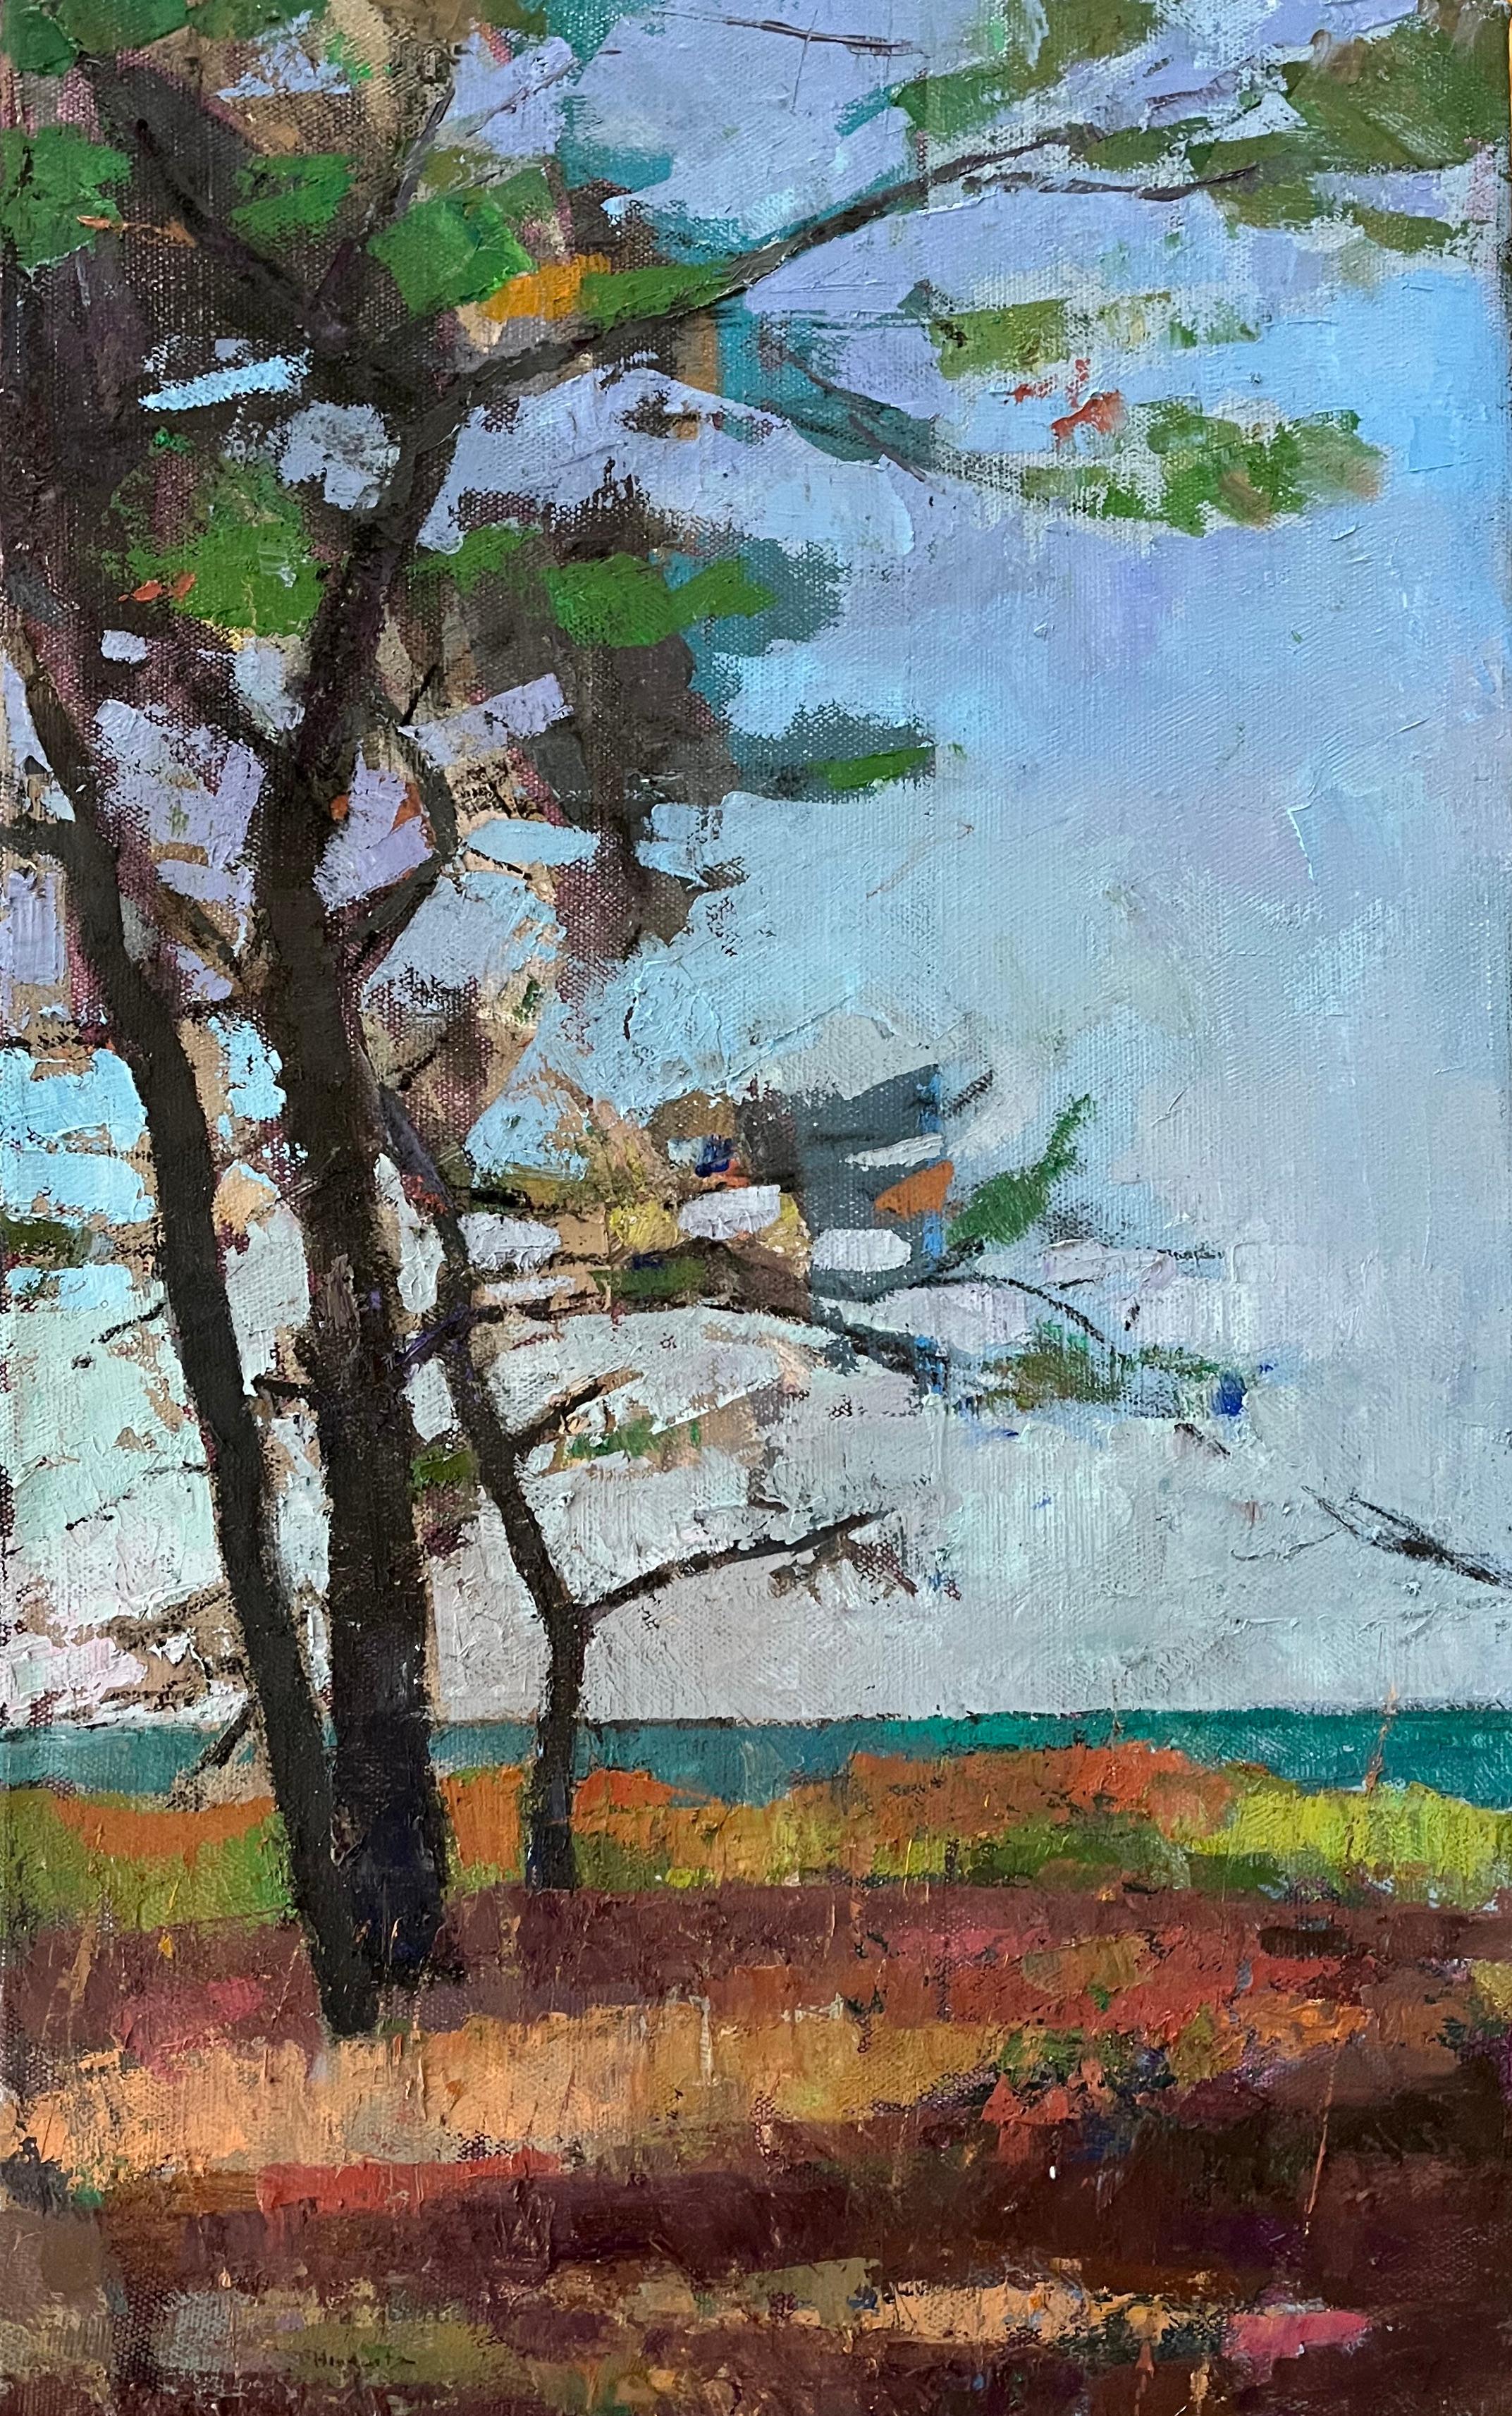 Larry Horowitz Landscape Painting - "Pines by the Sea" vertical oil painting of trees with teal ocean behind